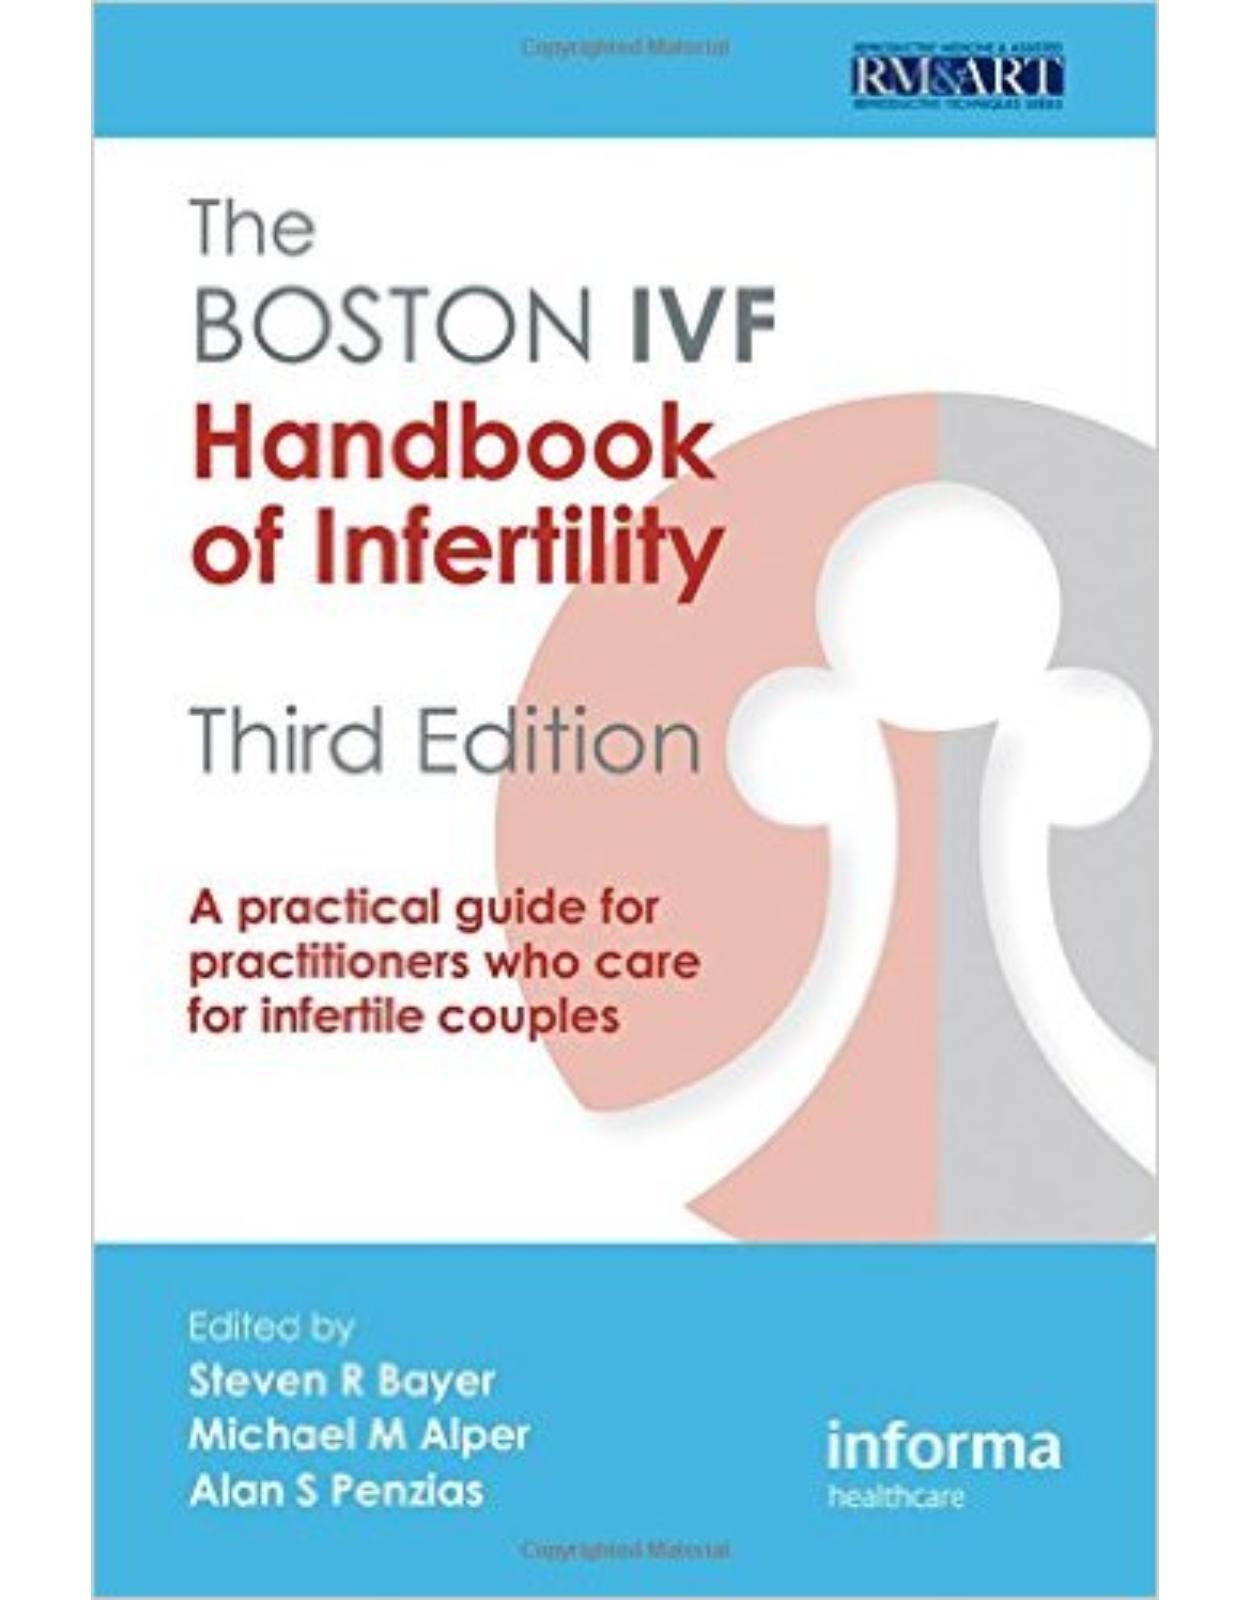 The Boston IVF Handbook of Infertility: A Practical Guide for Practitioners Who Care for Infertile Couples, Third Edition